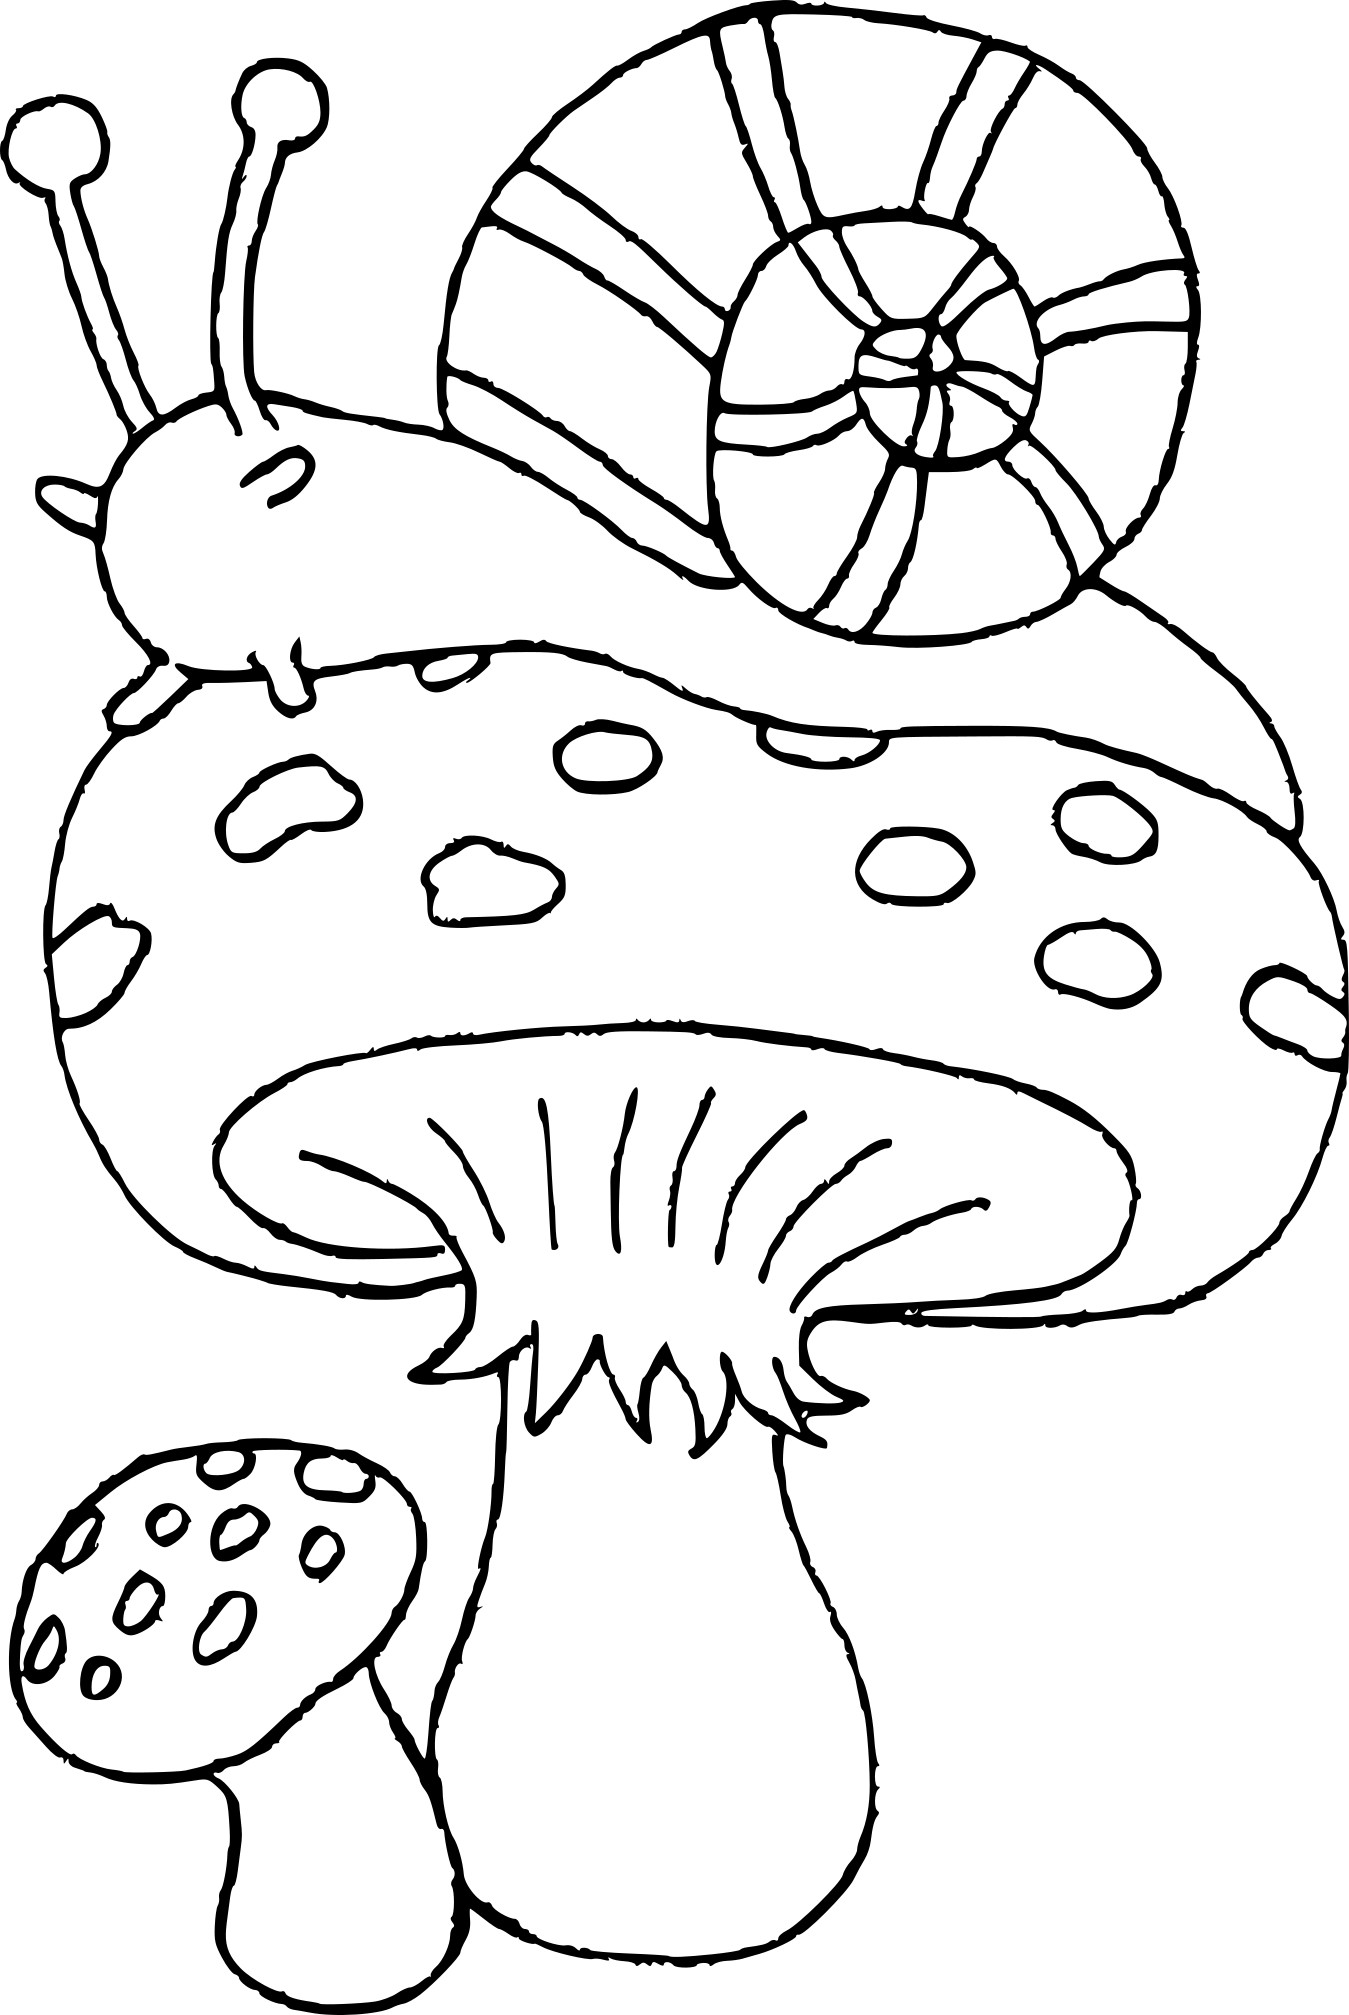 Snail On A Mushroom coloring page